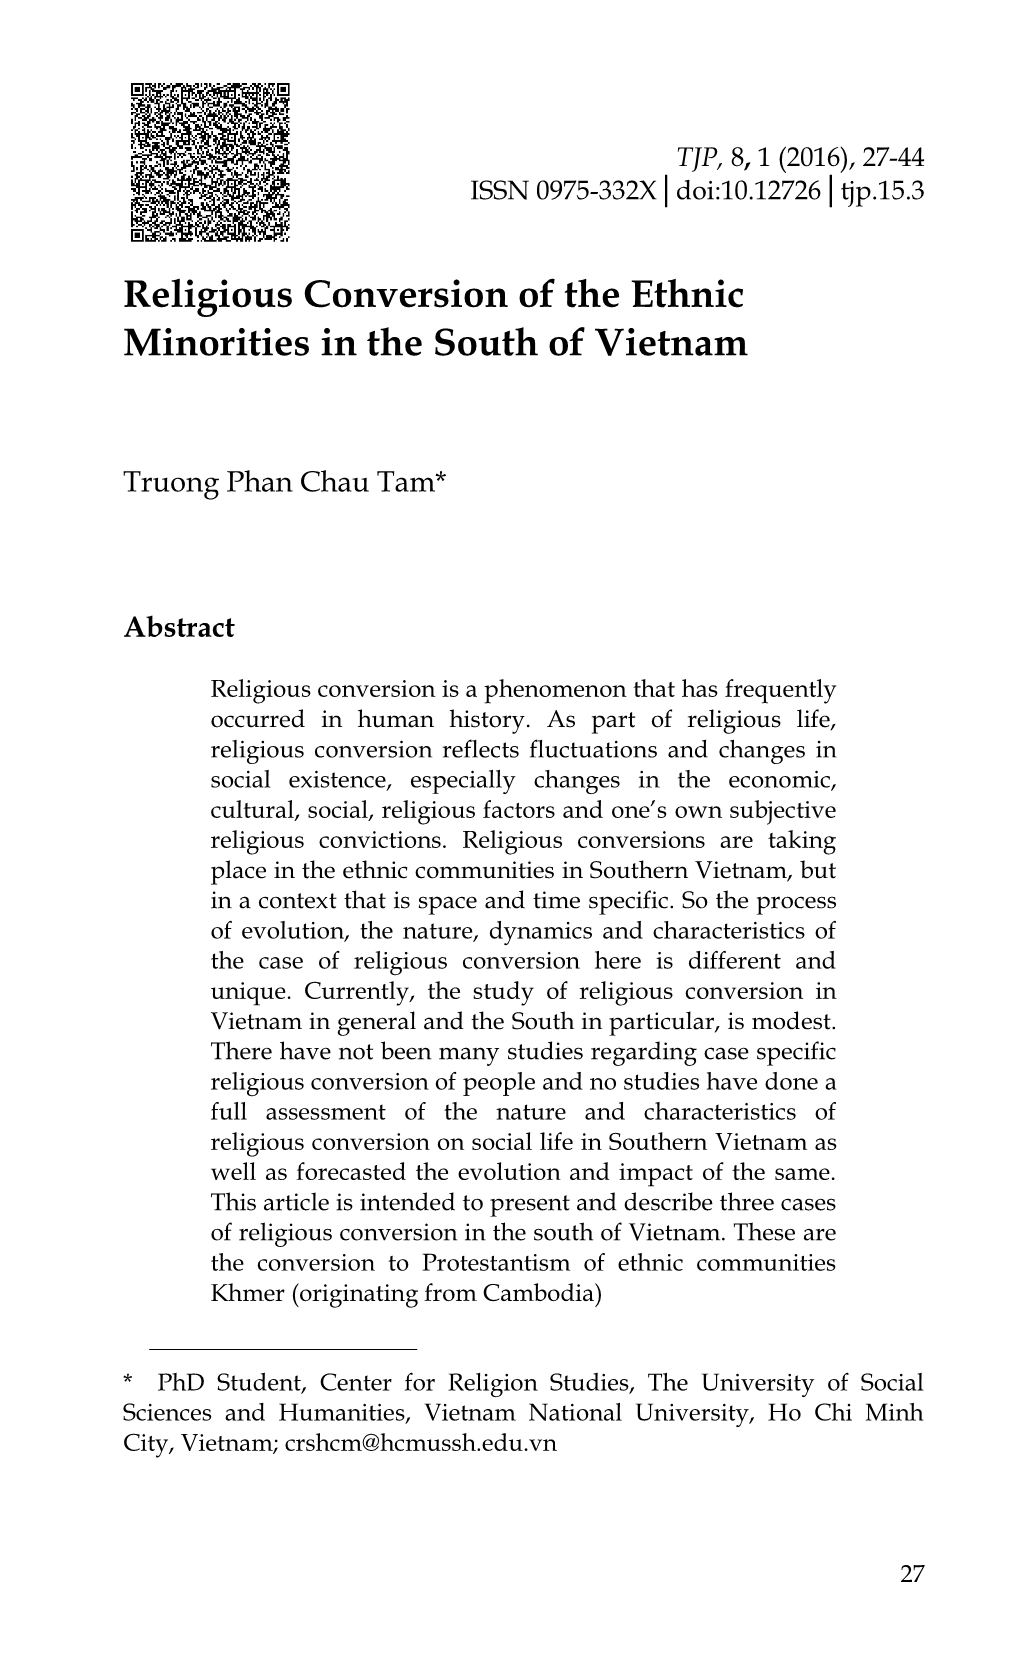 Religious Conversion of the Ethnic Minorities in the South of Vietnam